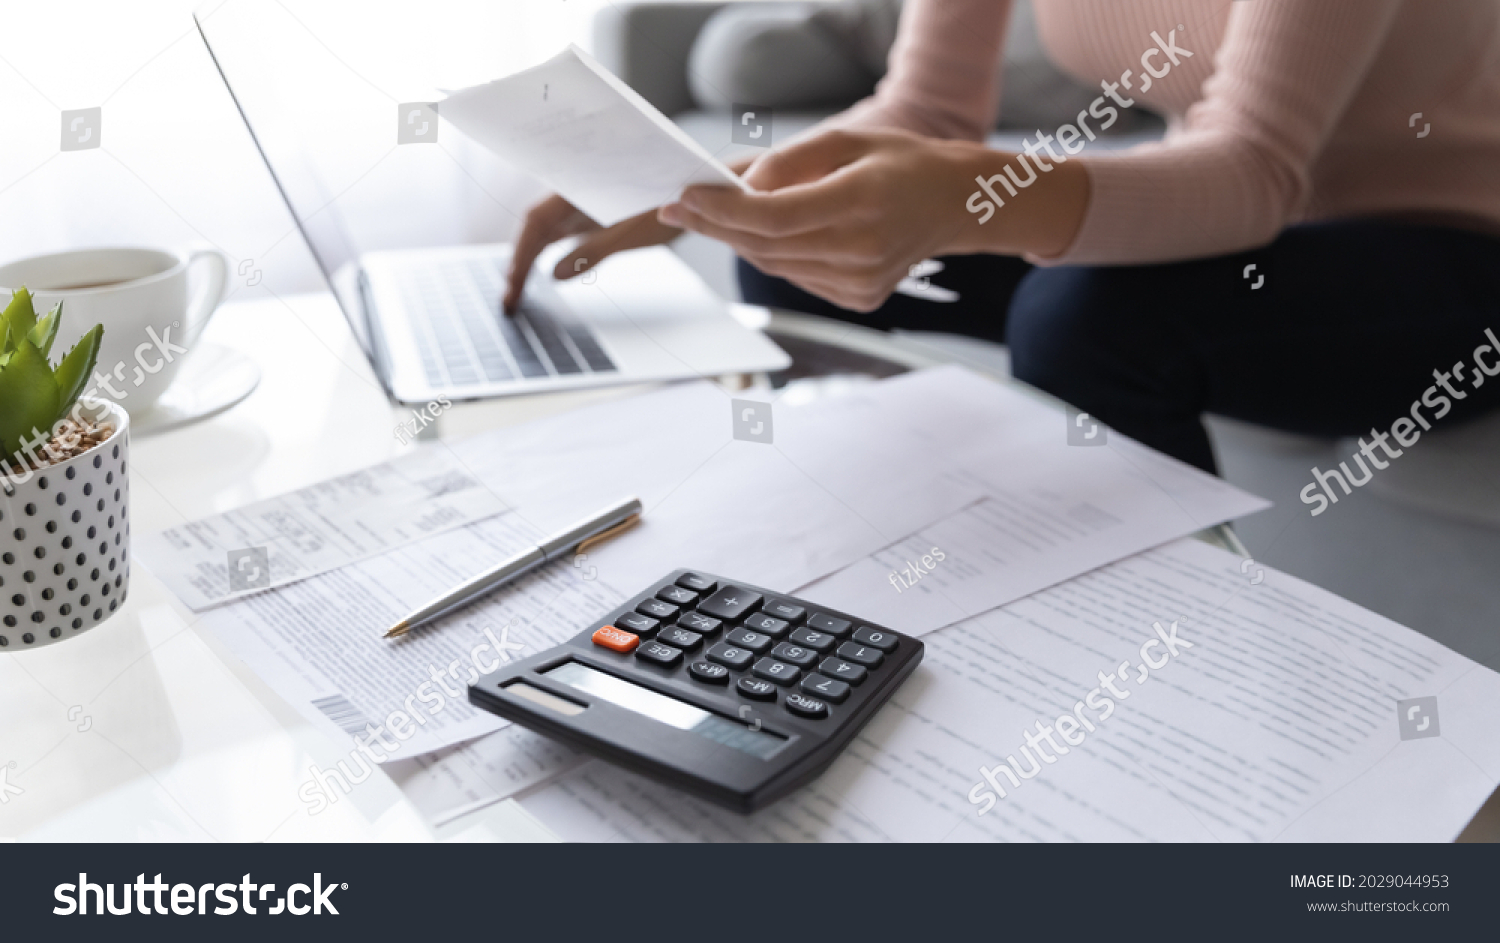 Accountant woman pay bills online use e-bank app, calculating household finances or taxes sit on sofa at home office. Family expenditures management, close up focus on calculator and heap of receipts #2029044953